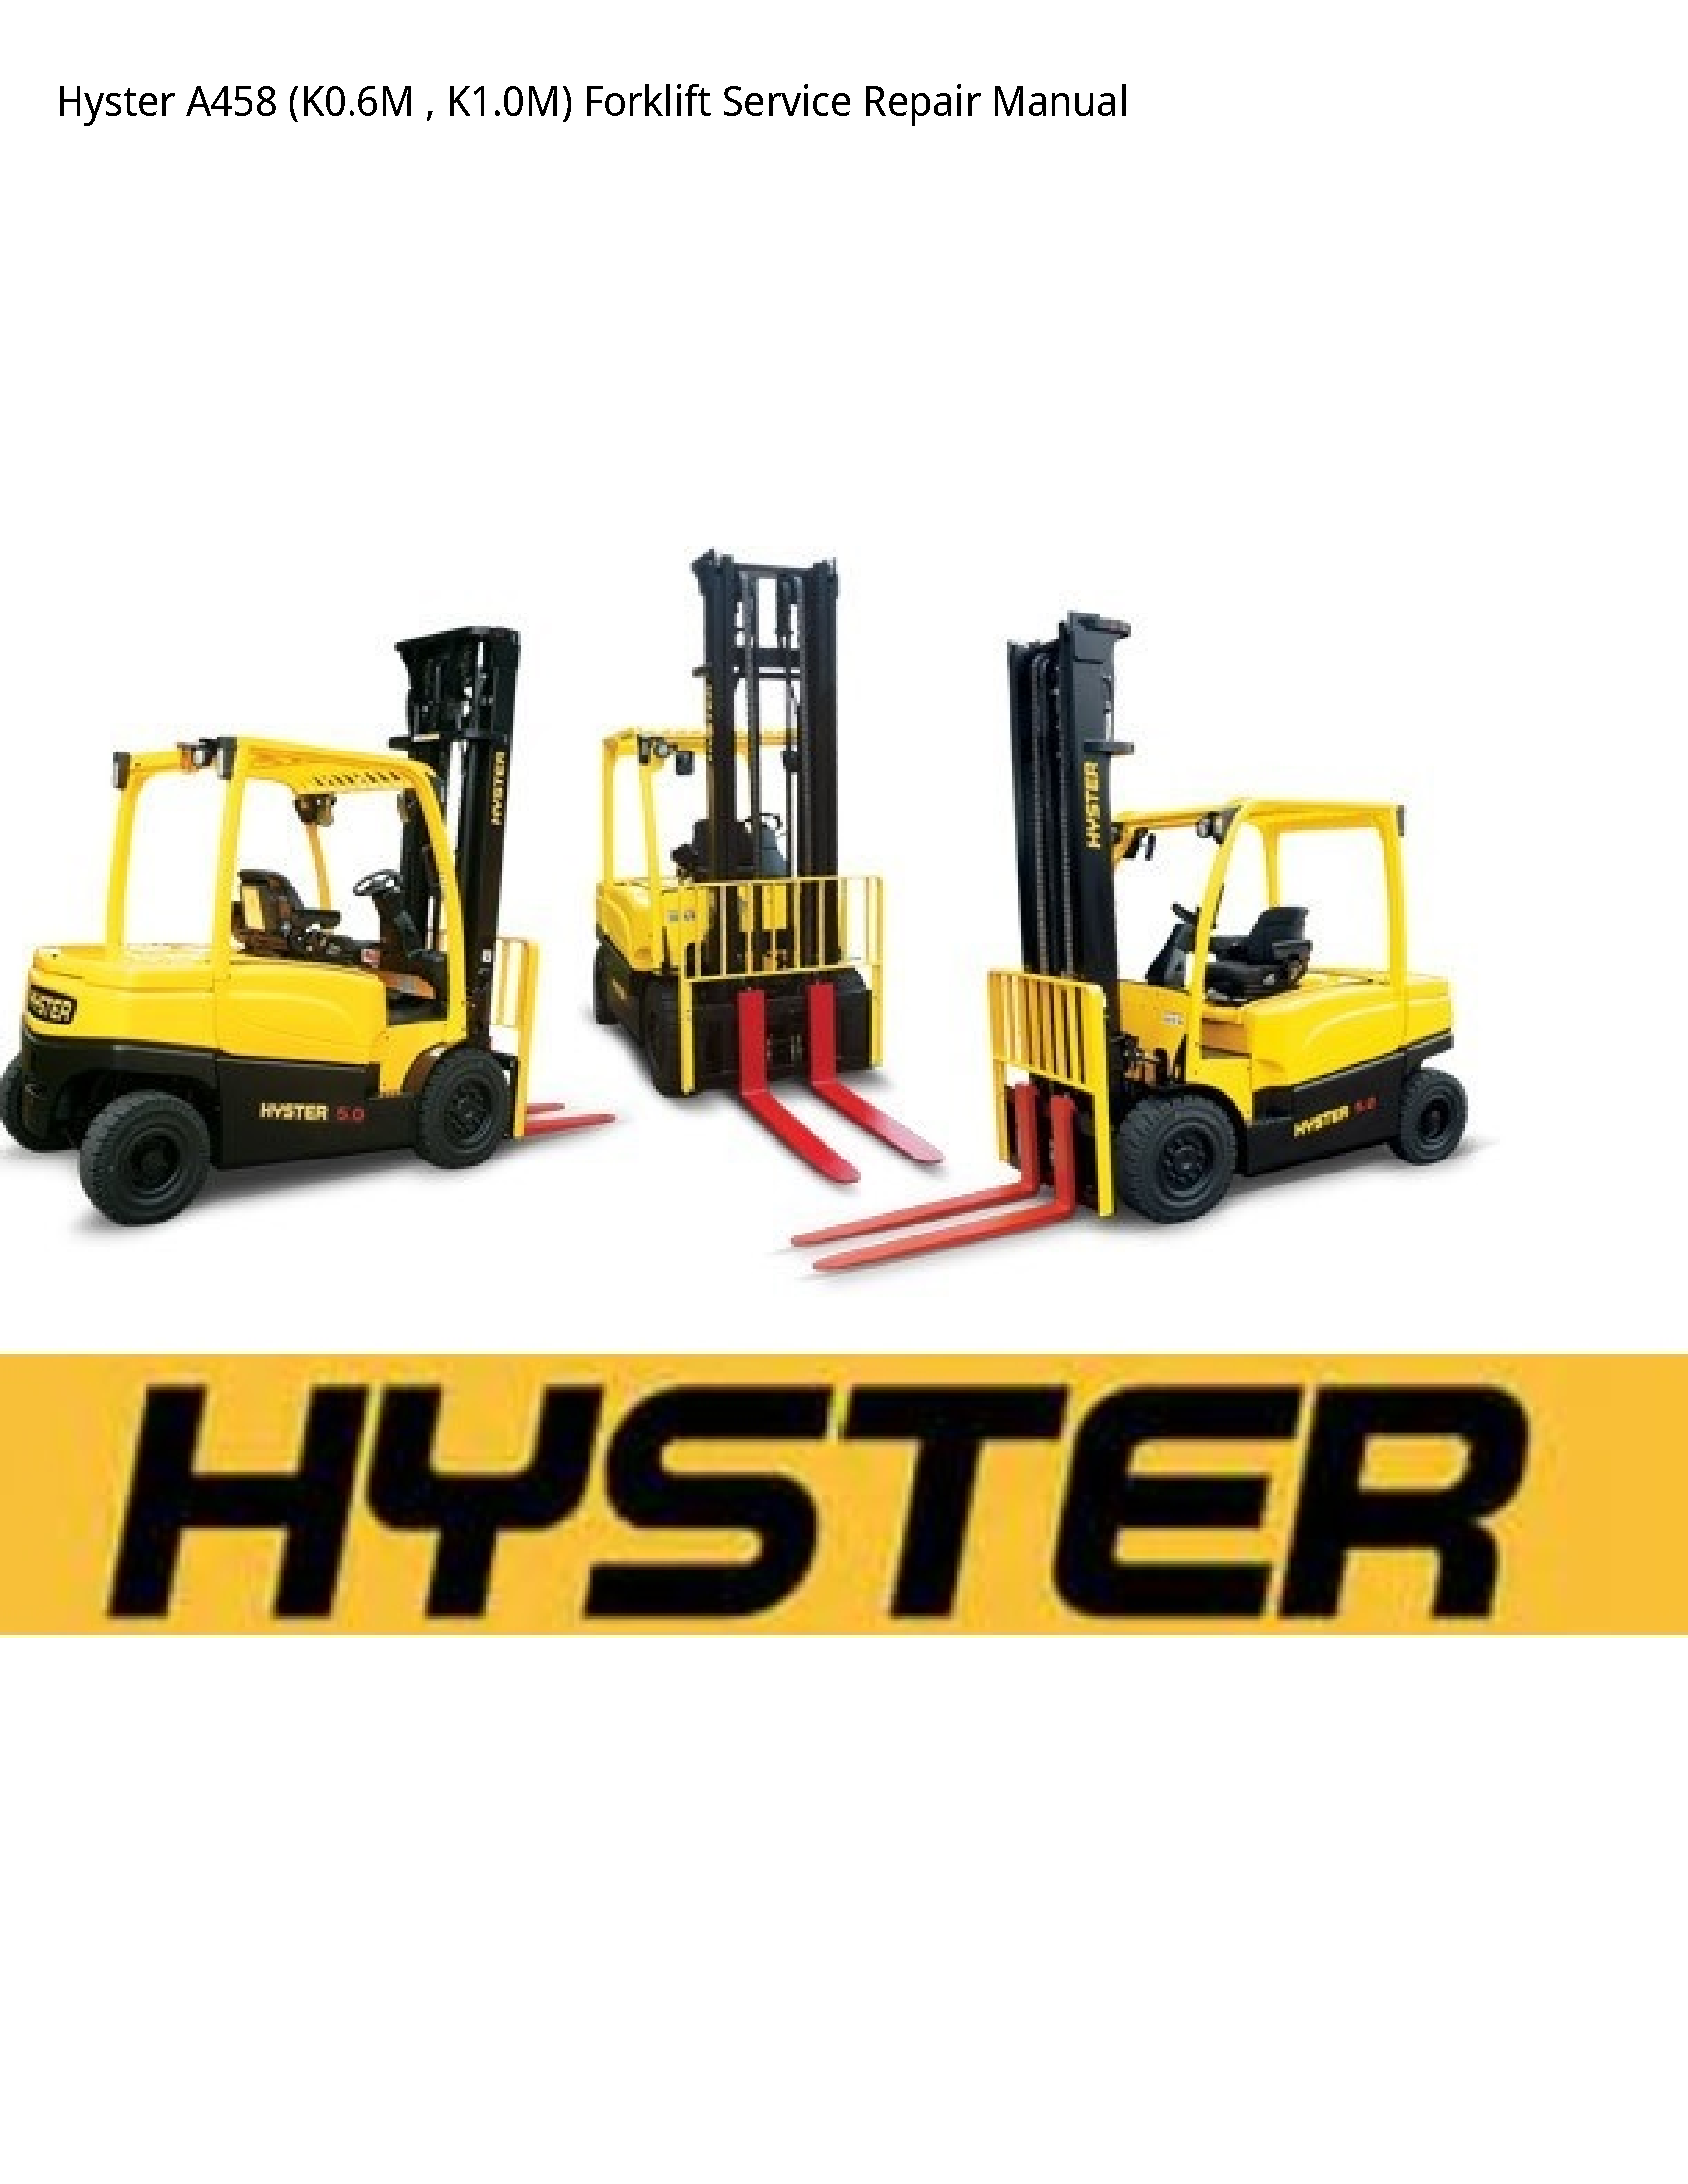 Hyster A458 Forklift manual